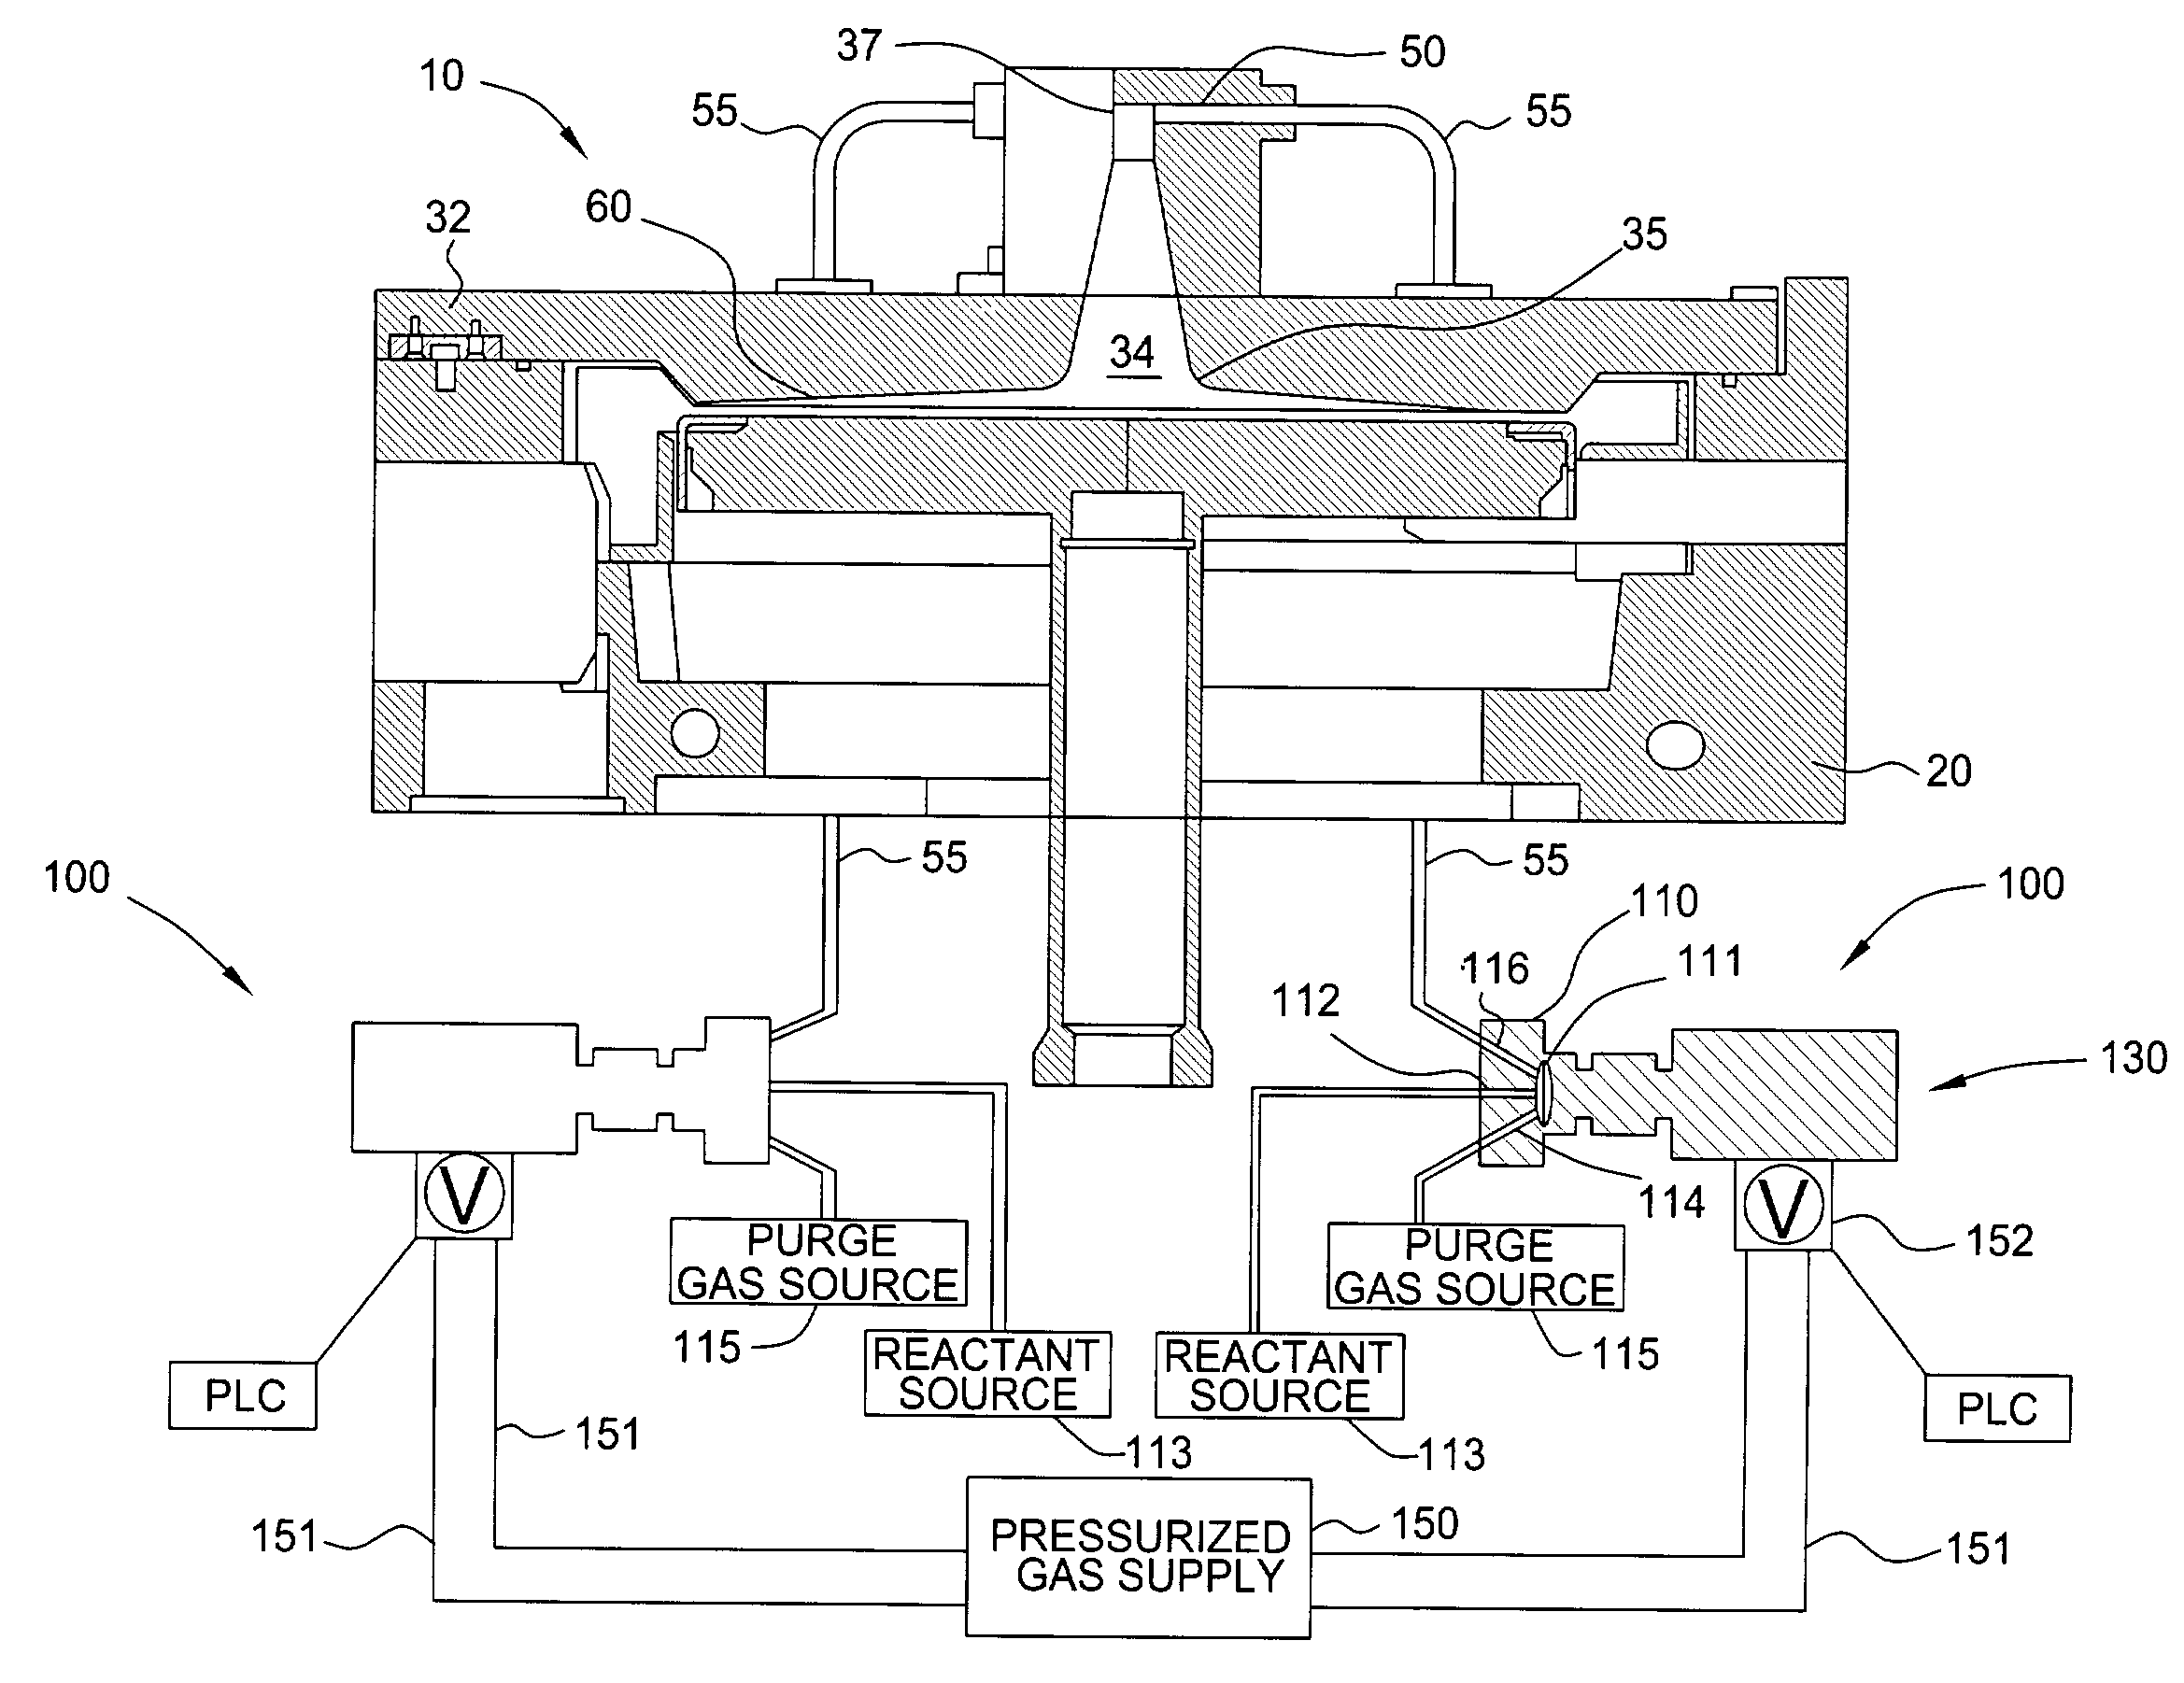 Valve design and configuration for fast delivery system